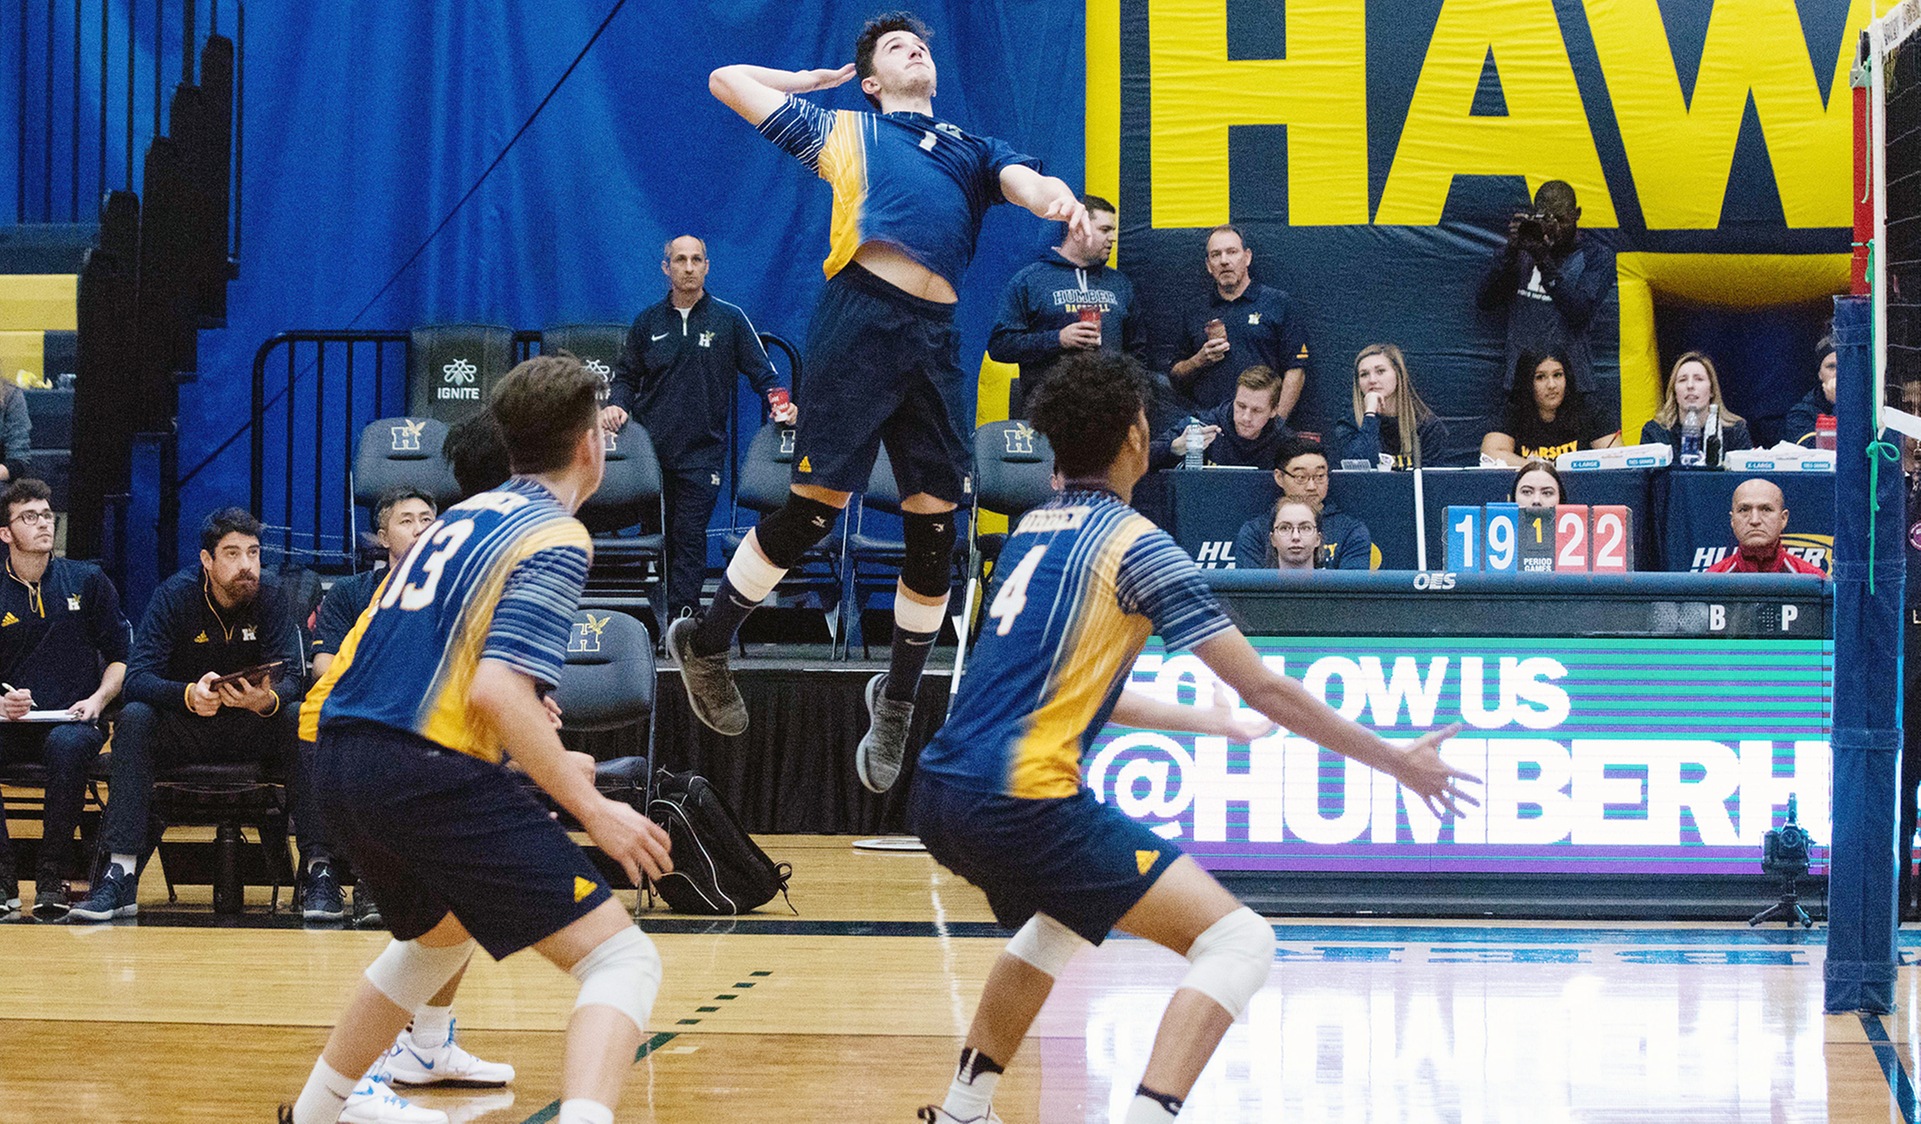 HAWKS LOOK TO REBOUND QUICKLY AFTER DROPPING FIRST MATCH OF THE YEAR